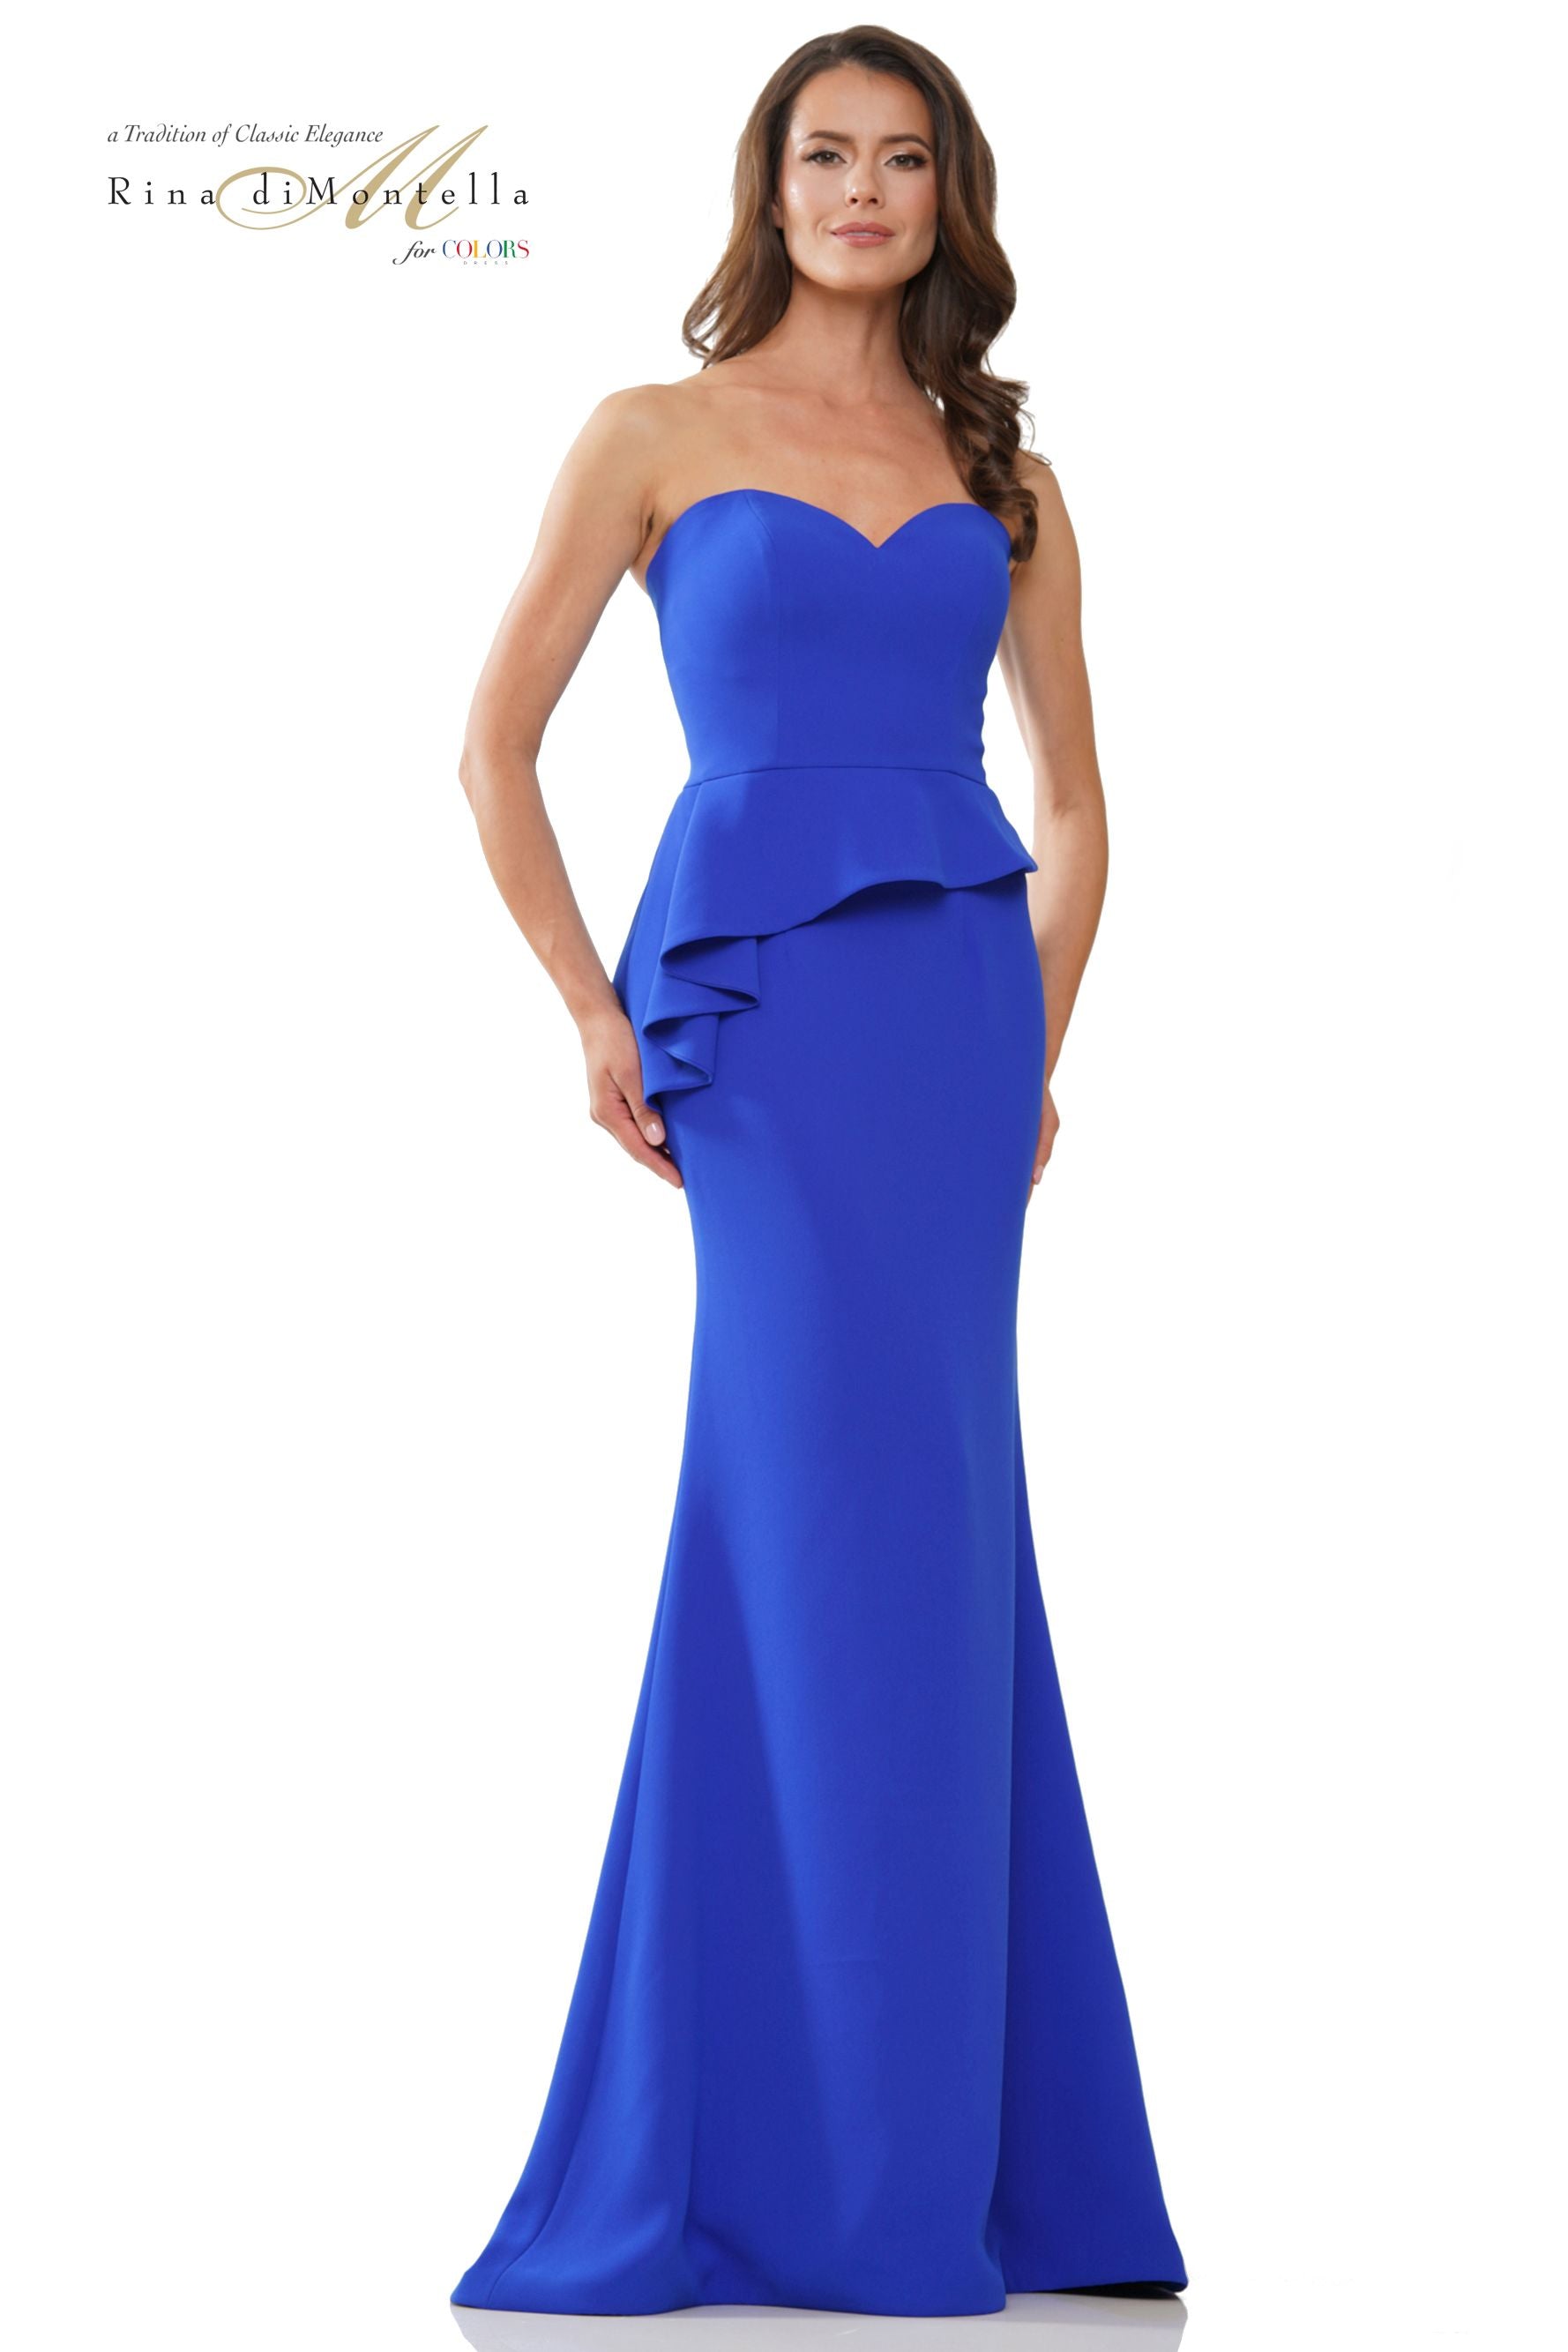 Rina Di Montella Fitted Crepe Sweetheart Long Dress -RD2948